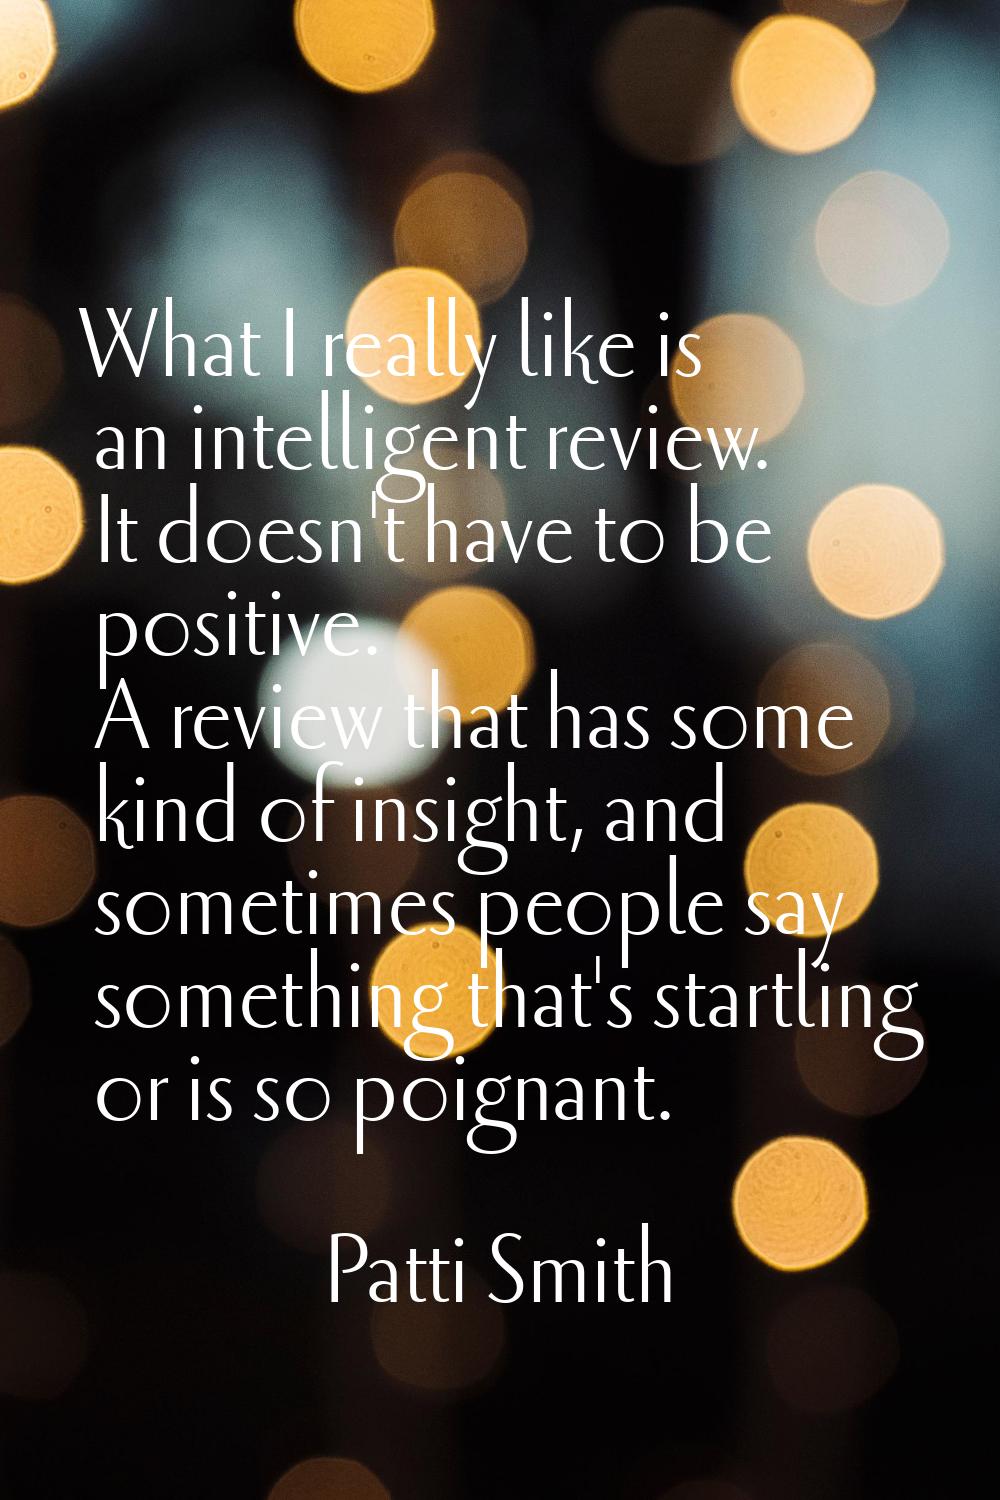 What I really like is an intelligent review. It doesn't have to be positive. A review that has some